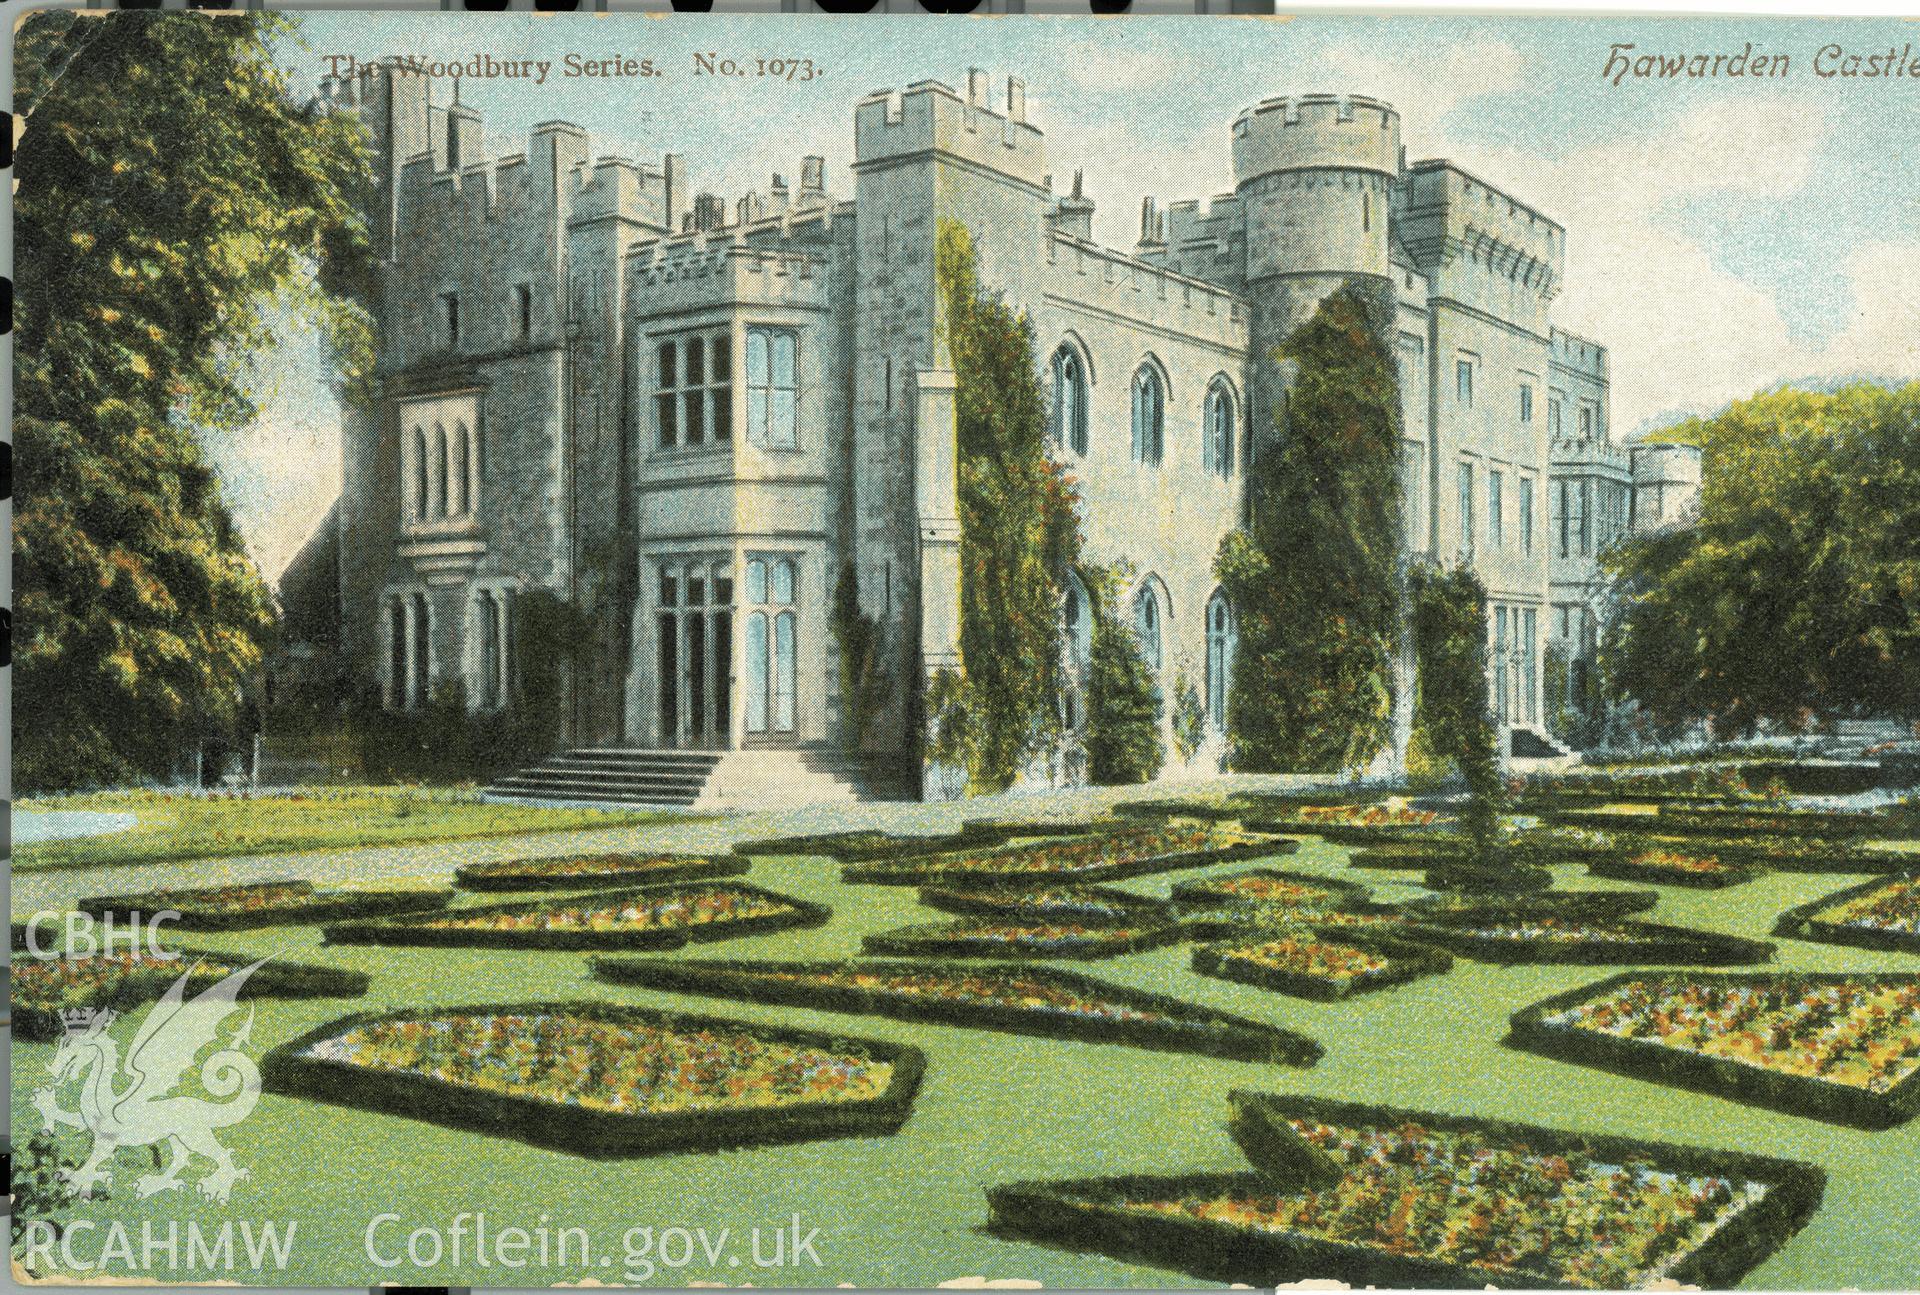 Digitised postcard image of Hawarden Castle, The Woodbury Series. Produced by Parks and Gardens Data Services, from an original item in the Peter Davis Collection at Parks and Gardens UK. We hold only web-resolution images of this collection, suitable for viewing on screen and for research purposes only. We do not hold the original images, or publication quality scans.